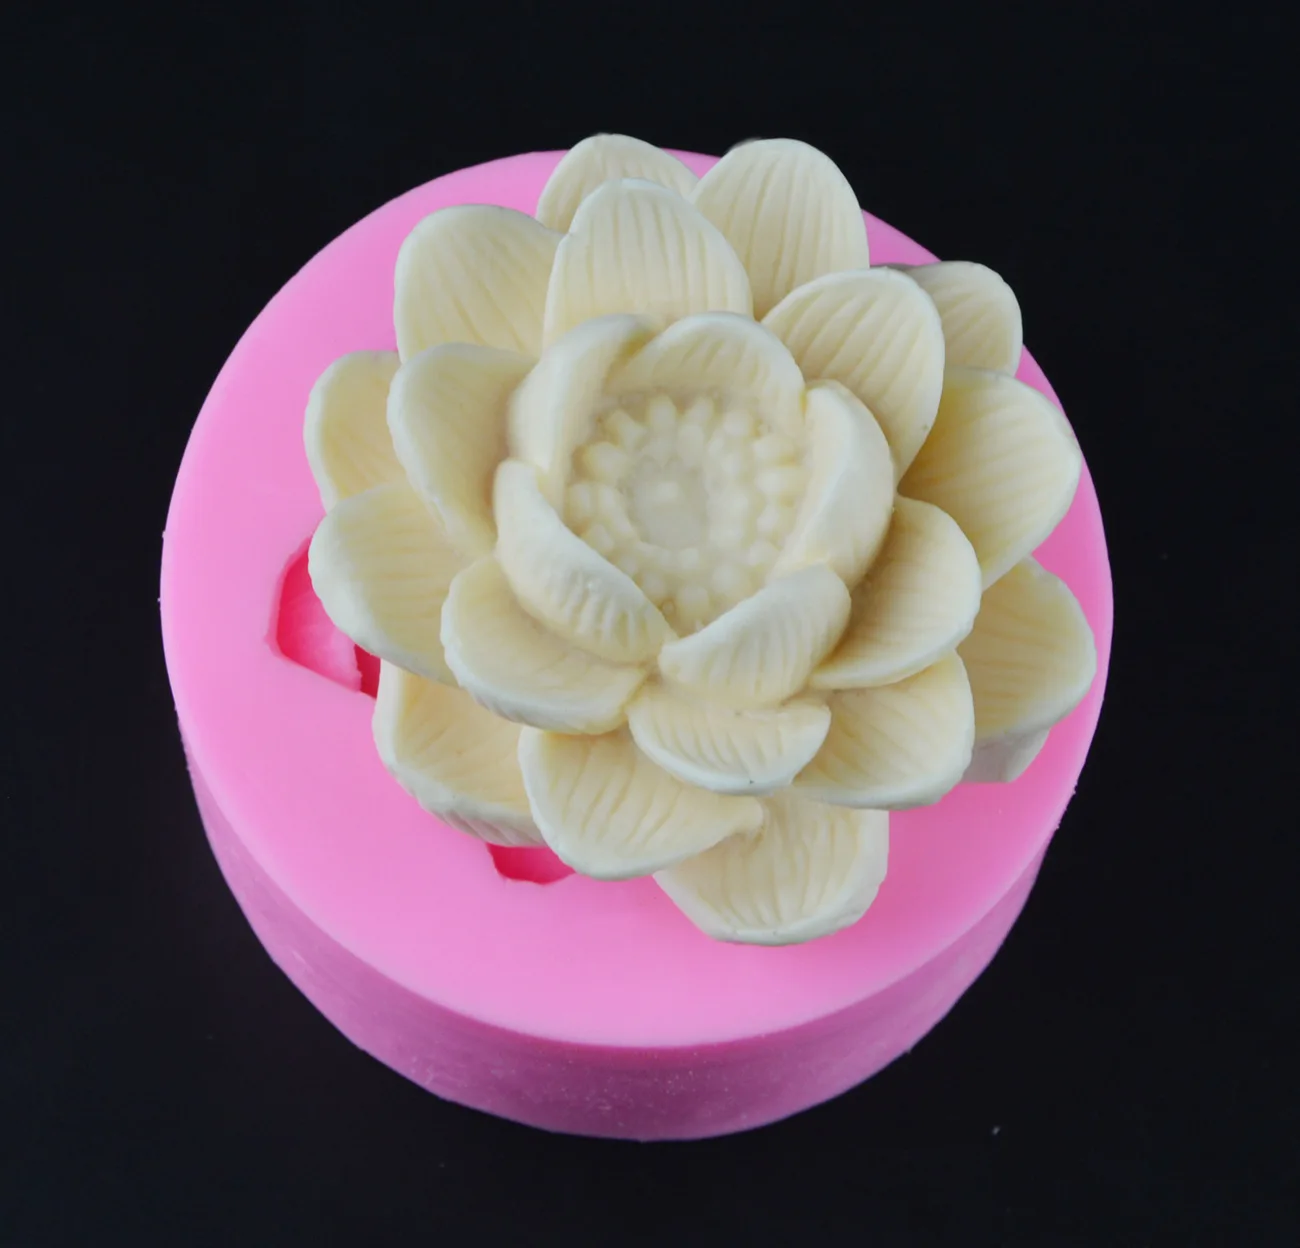 Lotus flower 3D Candle mold silicone fondant cake mold